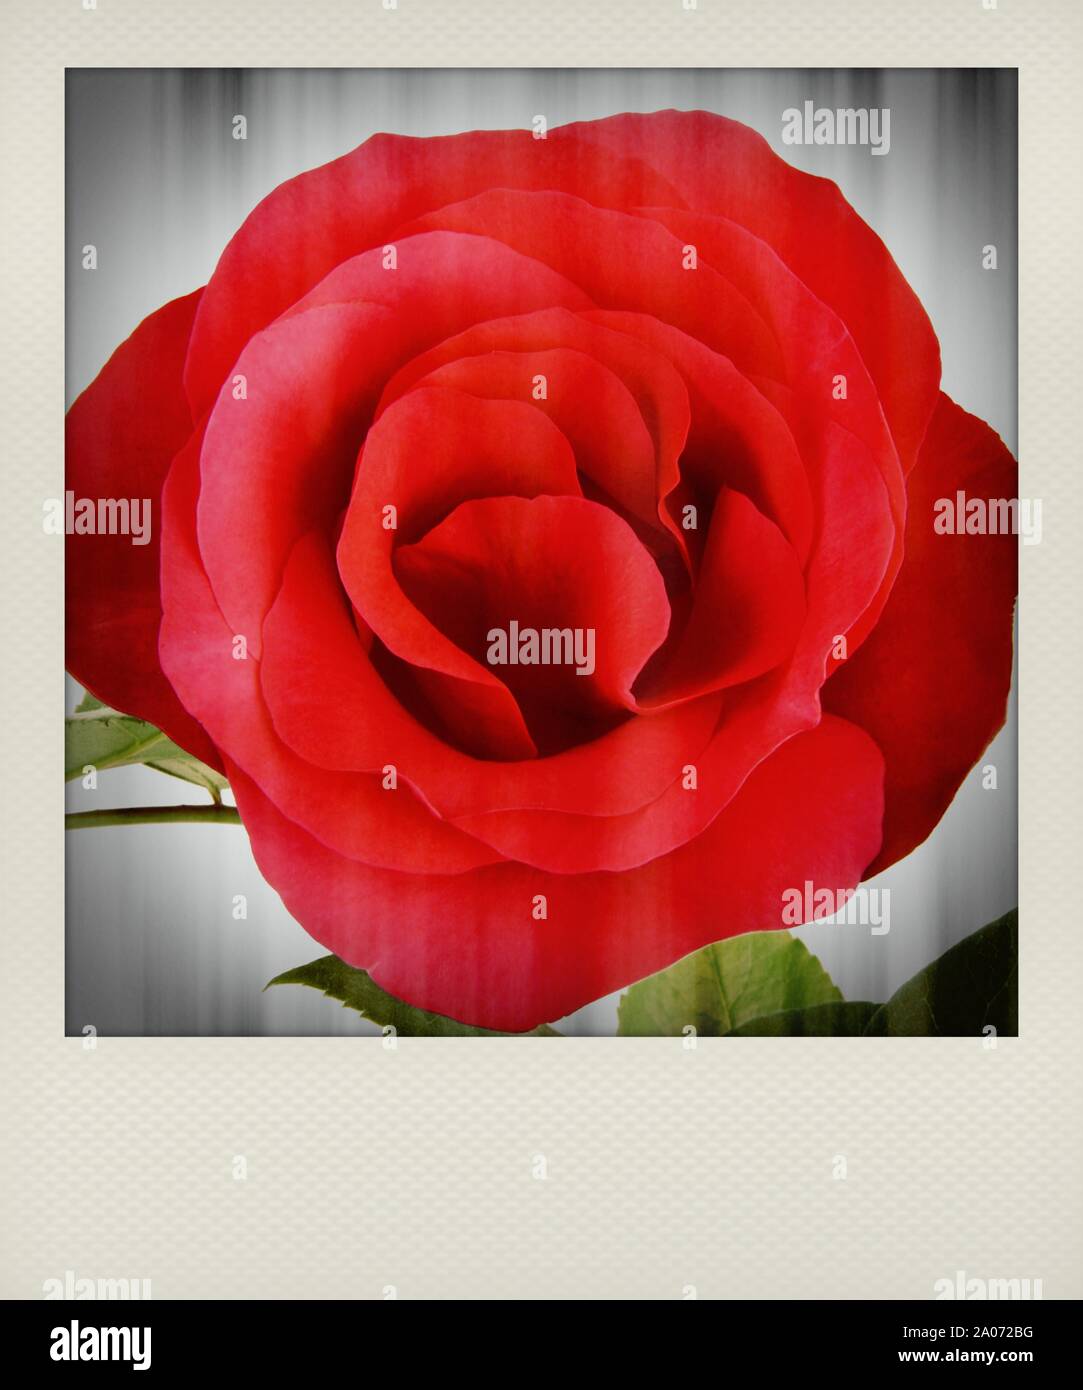 Polaroid red rose flower close up Stock Photo